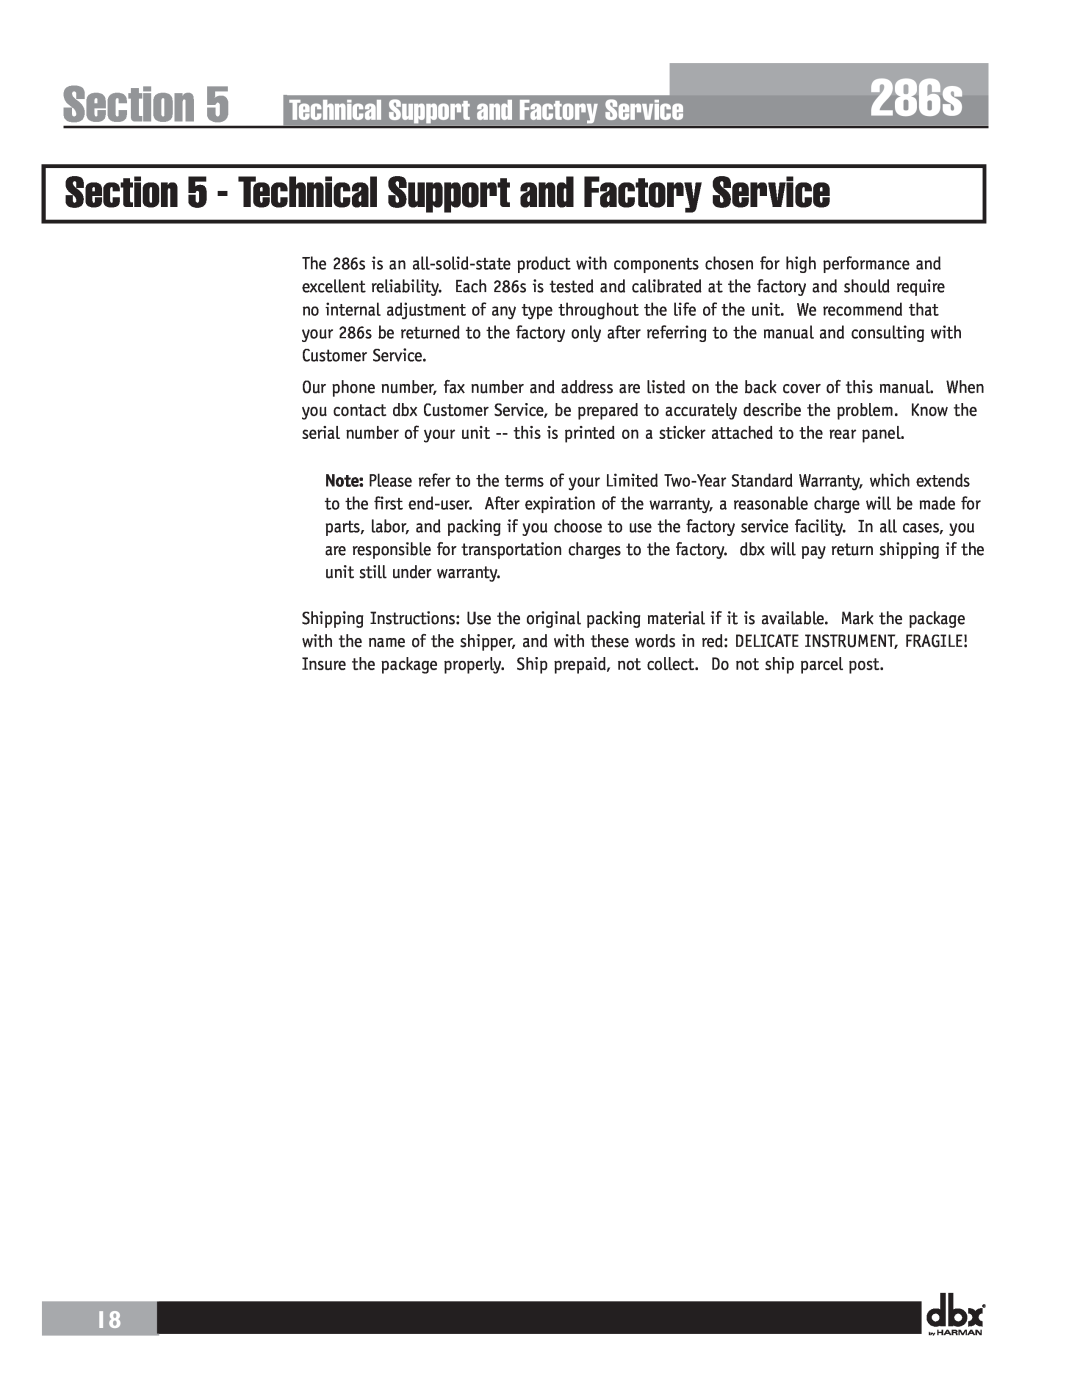 Harman user manual Technical Support and Factory Service, 286s 